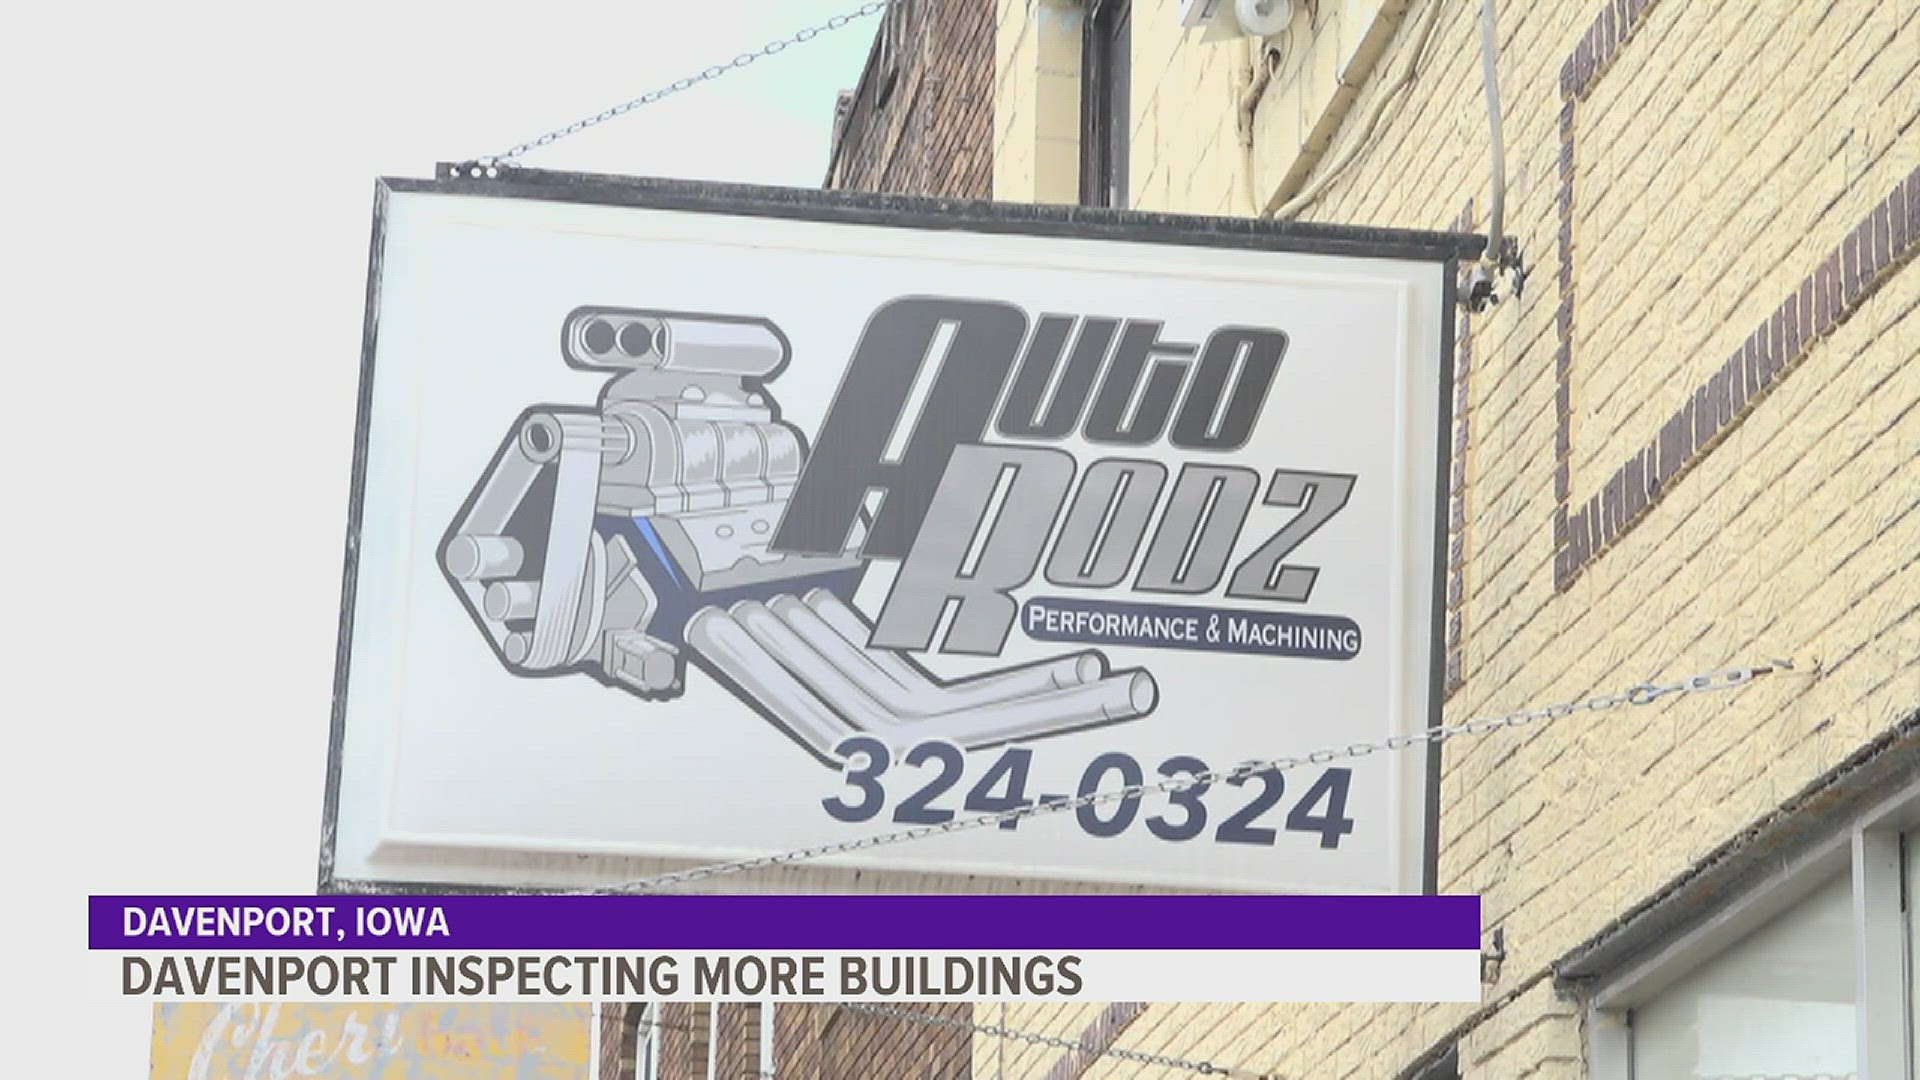 Auto Rodz Performance and Machining is frustrated with the city's lack of assistance. In addition, another property owned by Wold was given a notice to vacate.